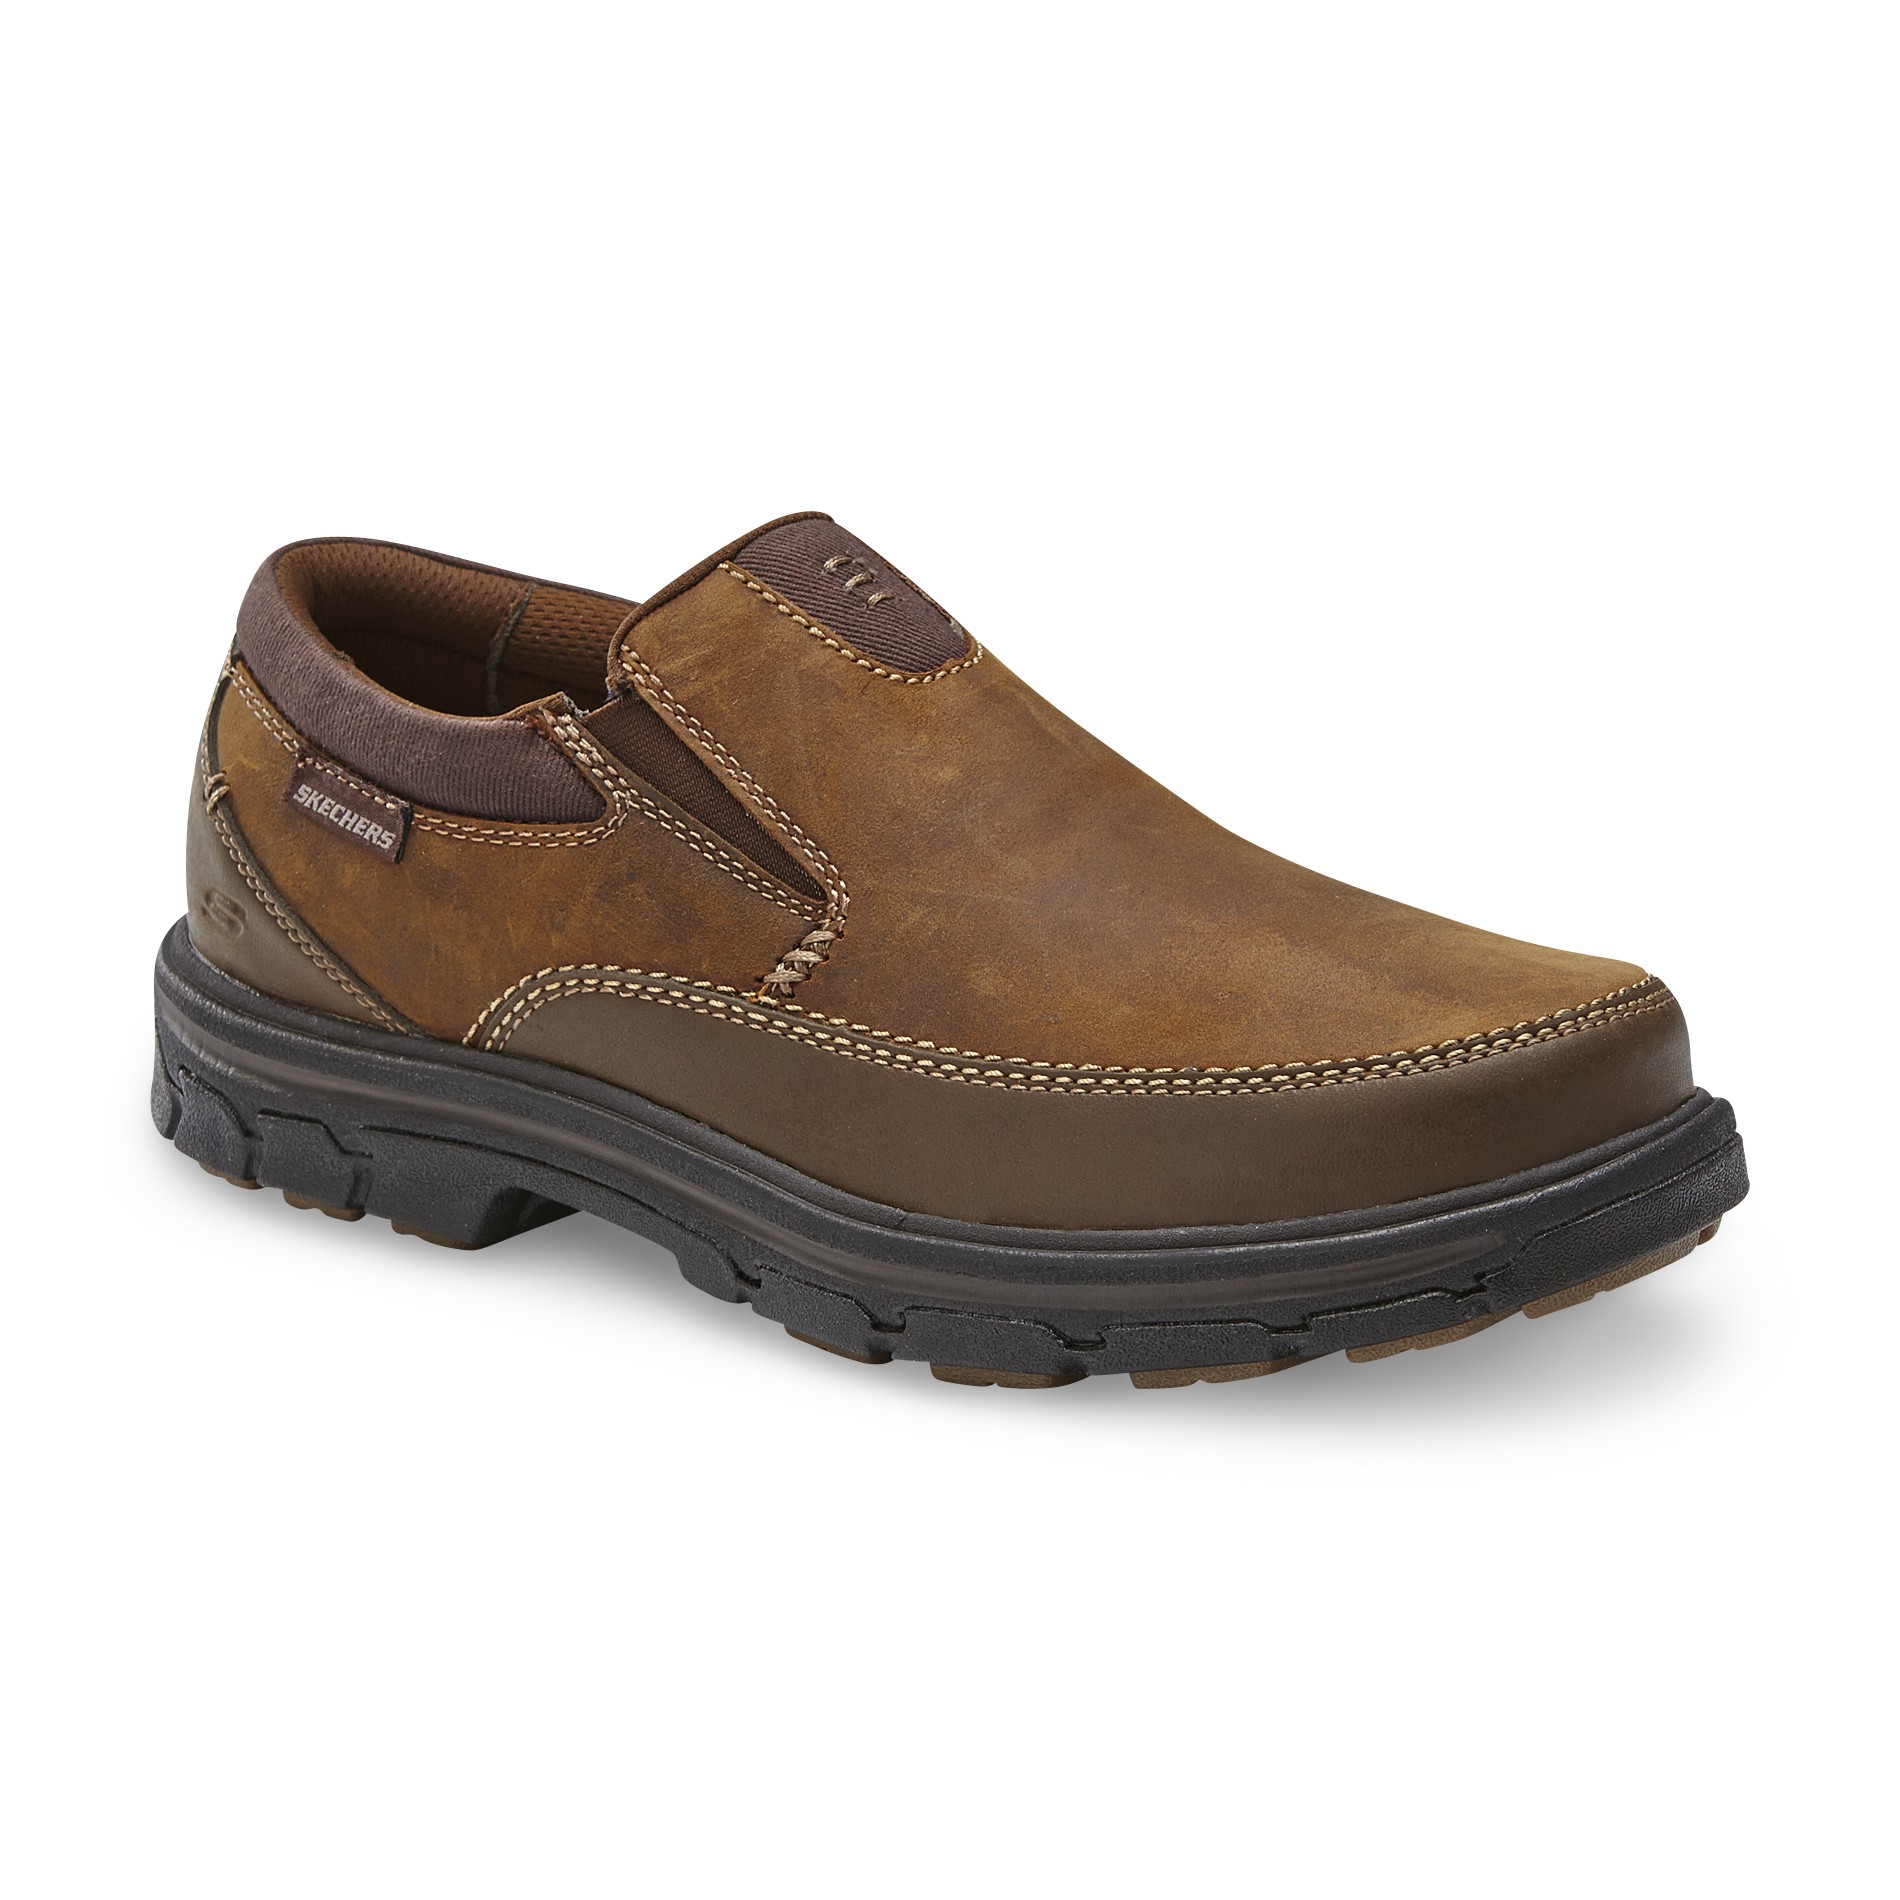 skechers leather upper balance brown